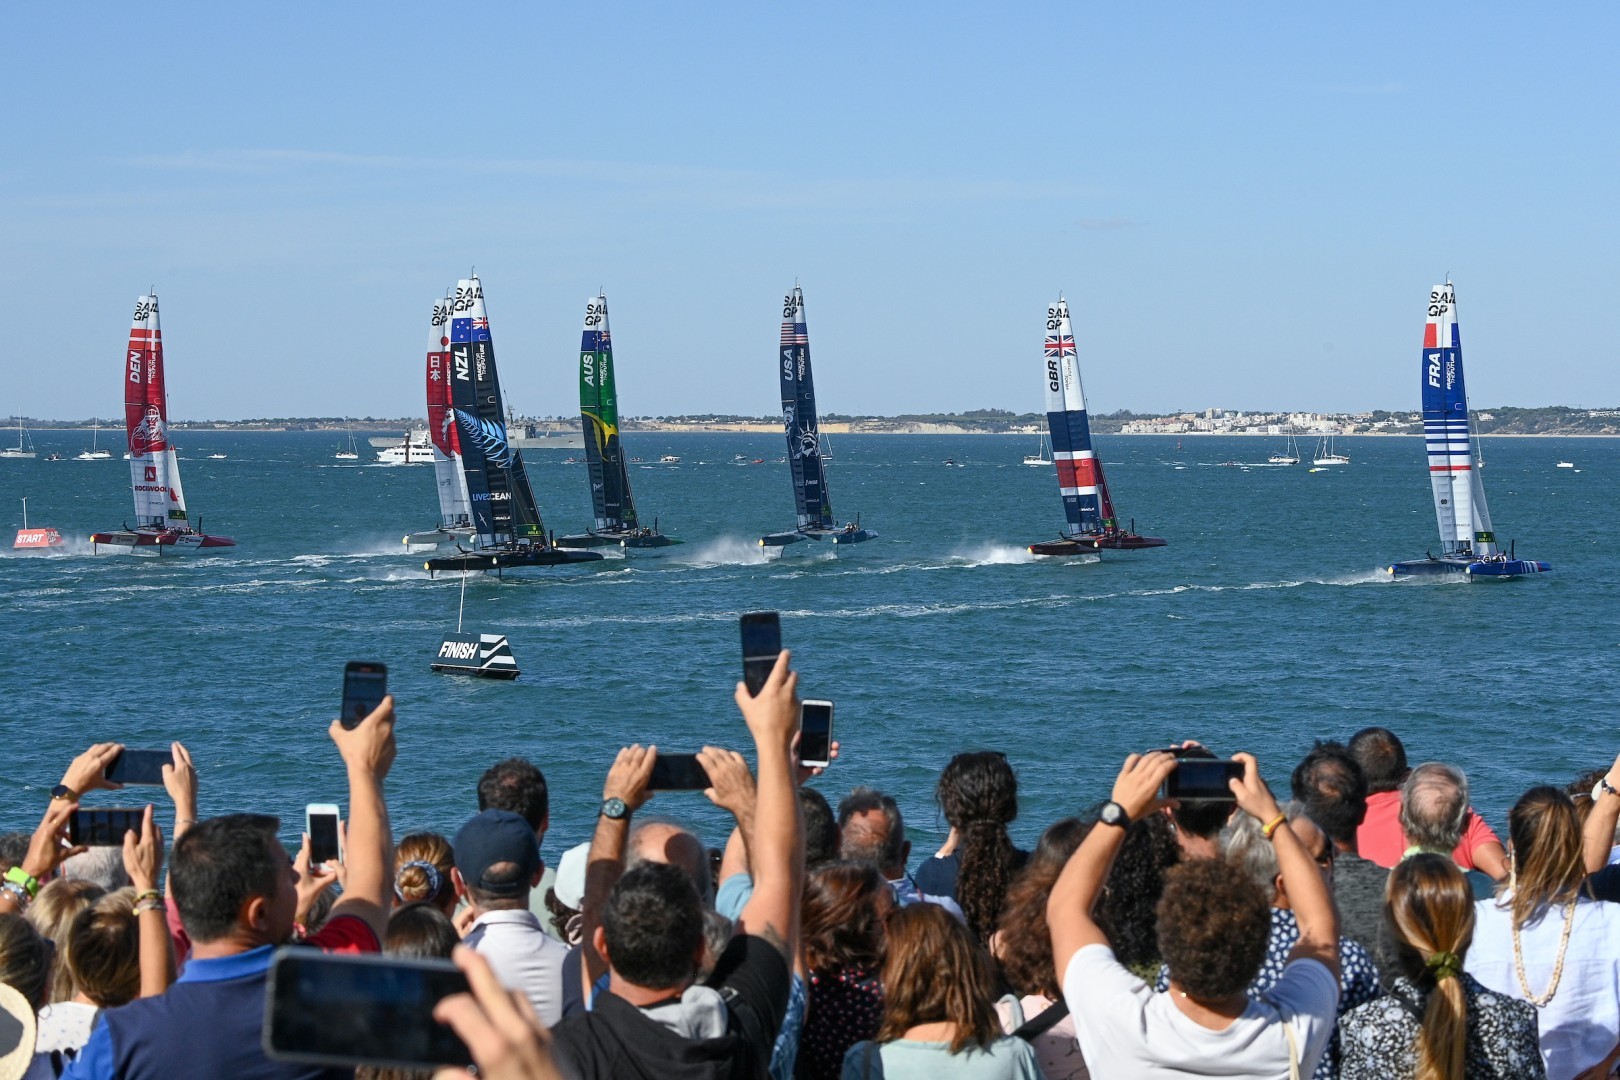 SailGP accelerates rapid growth across all areas of operation in Season 2